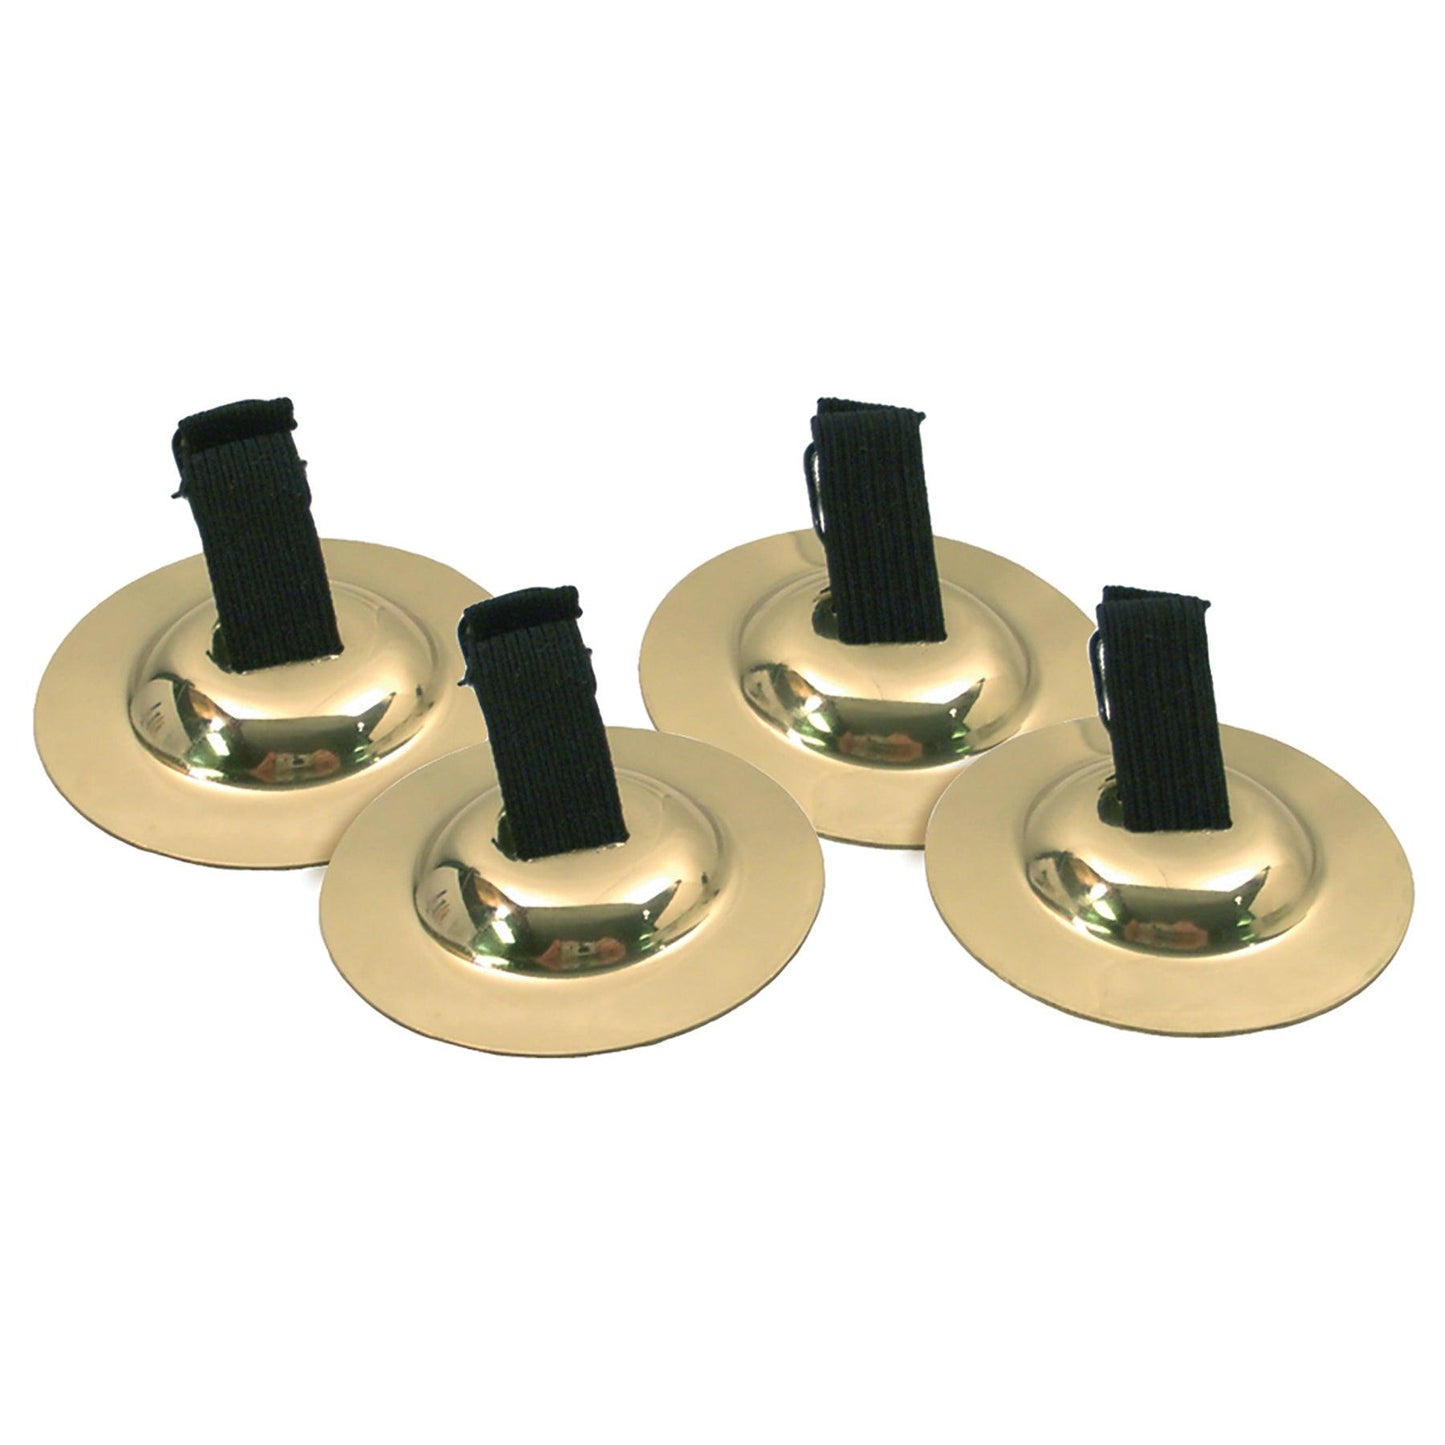 Stamped Finger Cymbals - Loomini